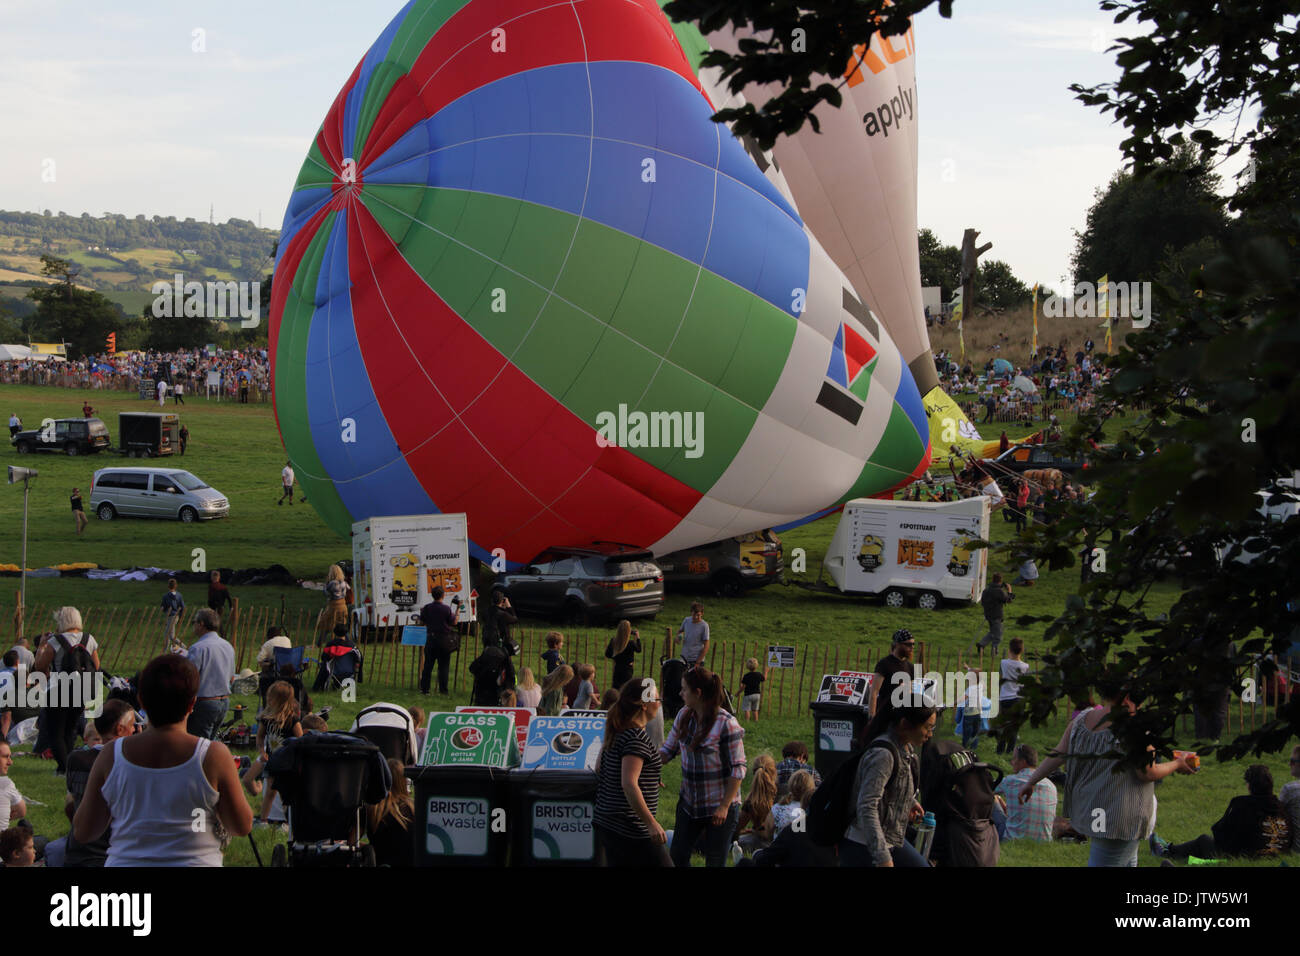 Hot air balloon struggling to stay upright against the gusts of wind at Bristol International Balloon Fiesta, Bristol, UK. No hot air balloons were able to fly despite best efforts due to the strong breeze. 10th August 2017. Stock Photo